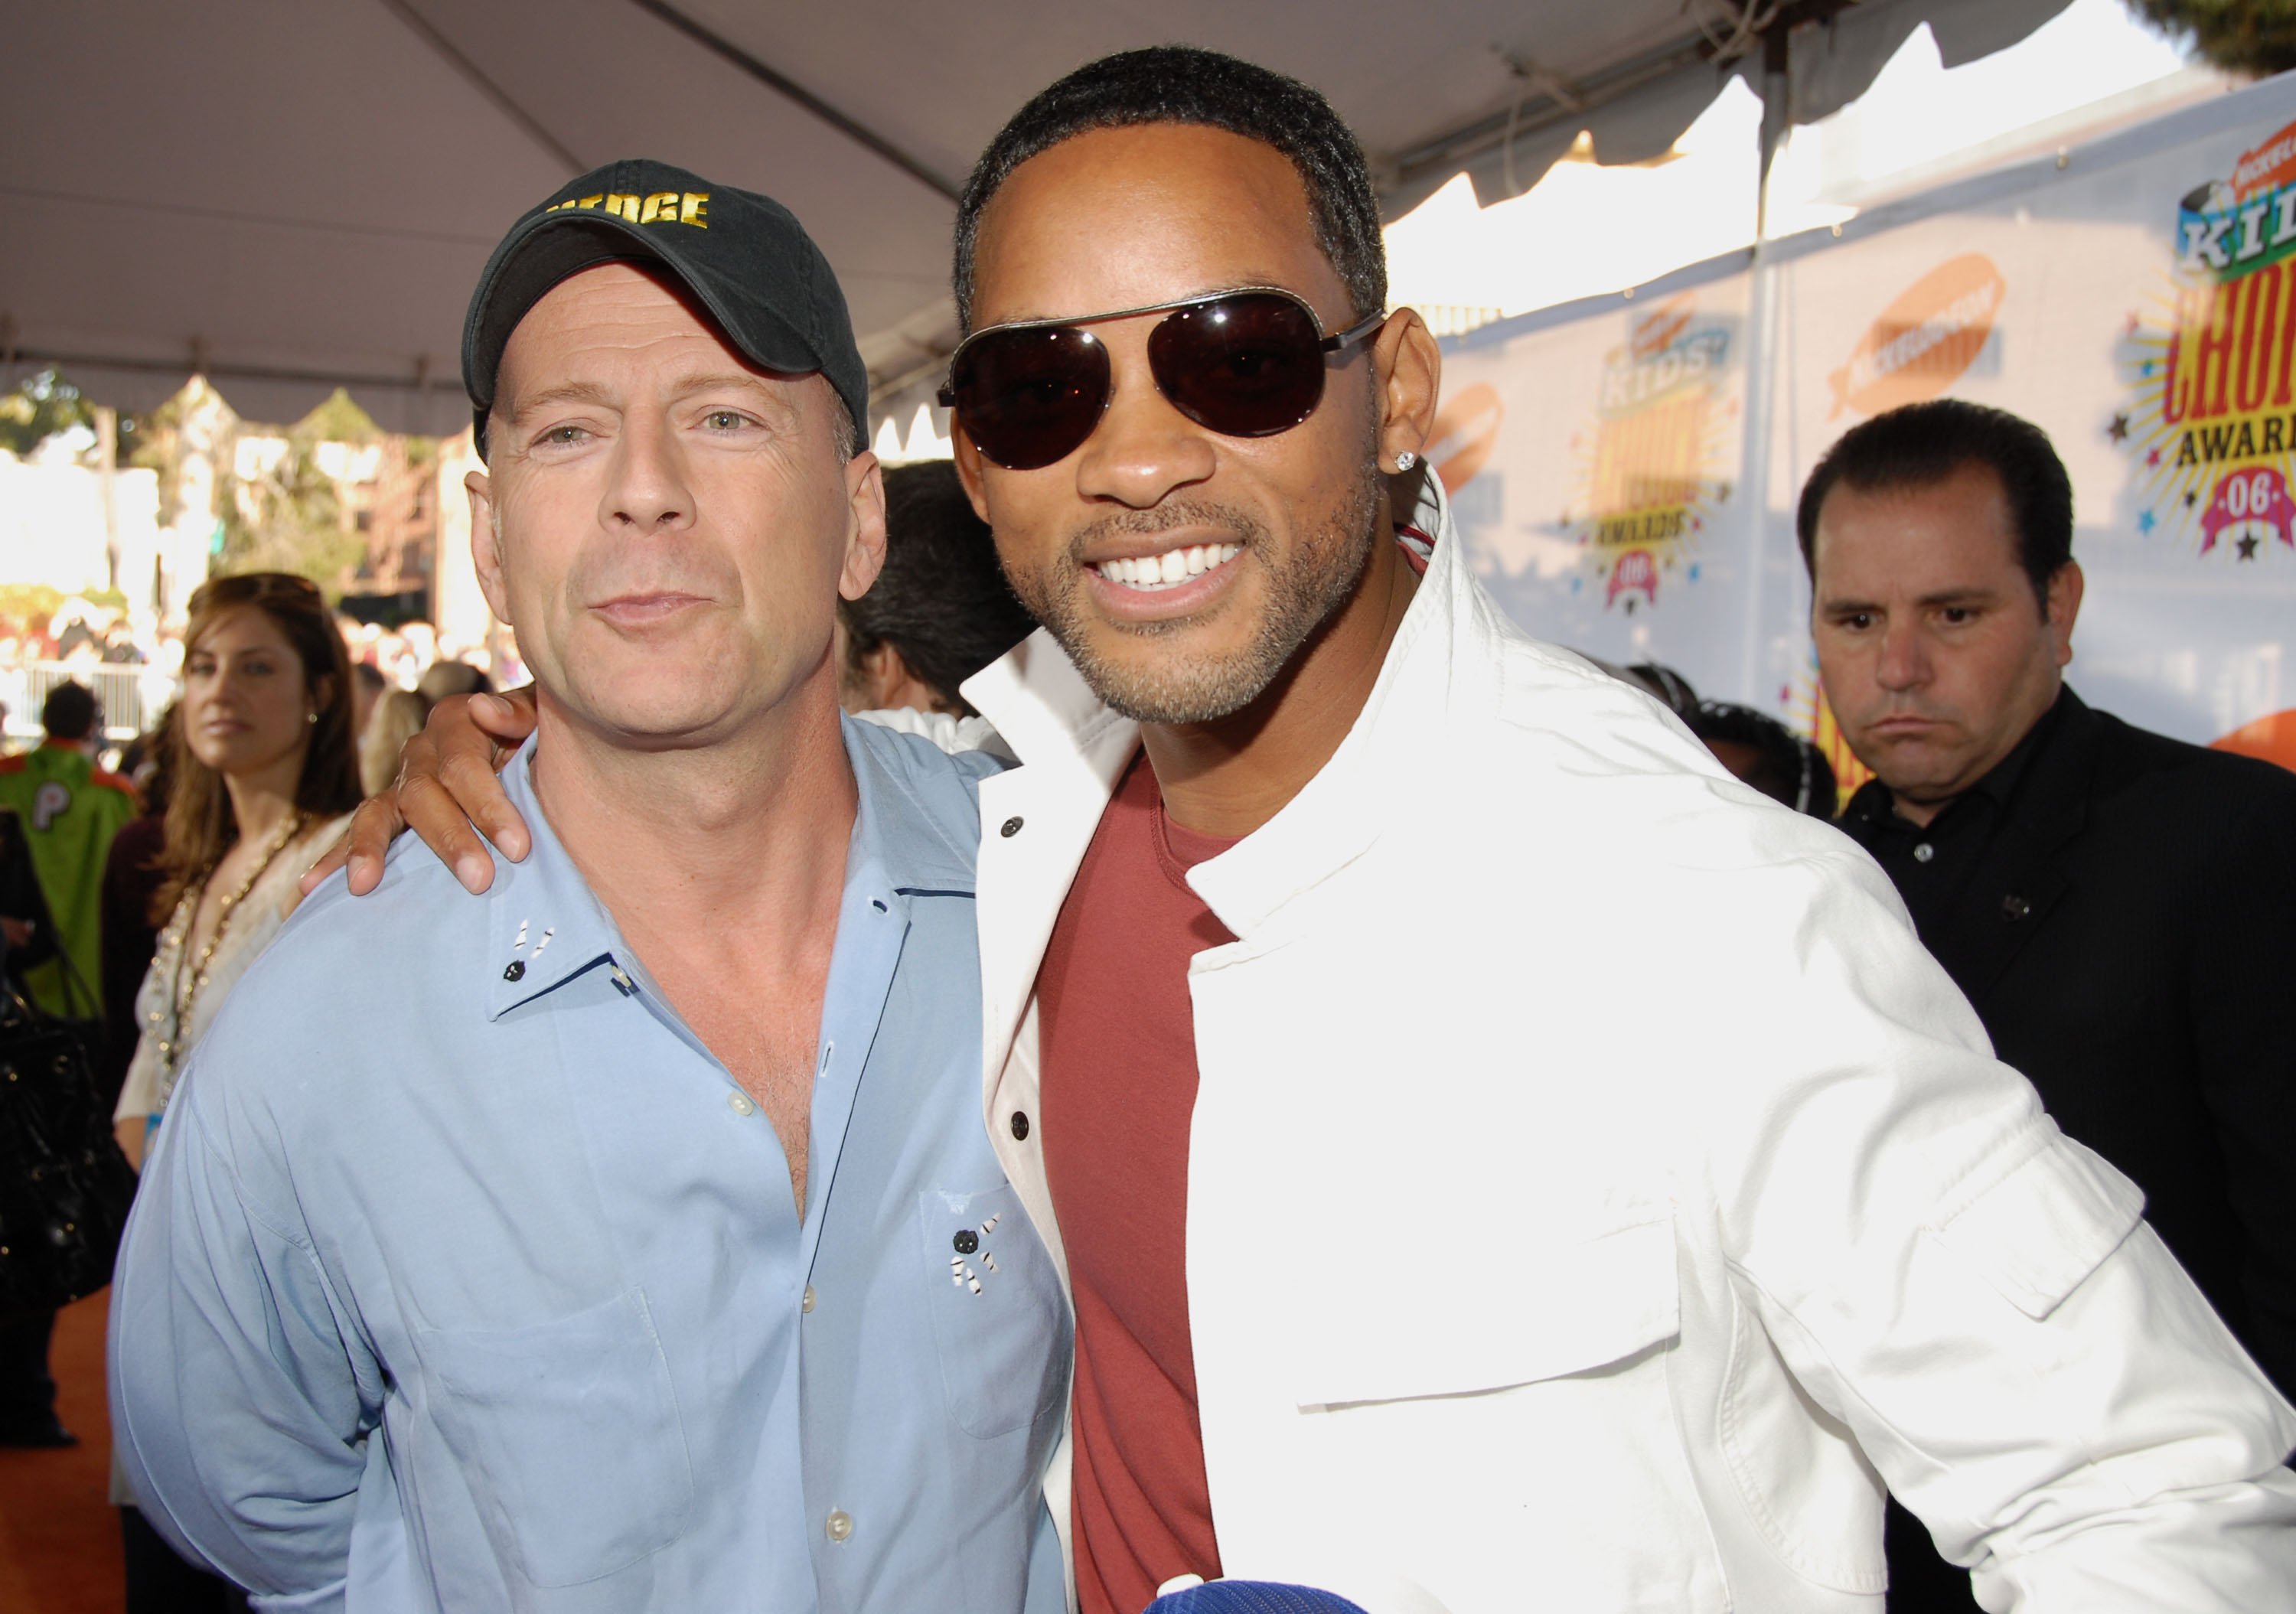 Bruce Willis and Will Smith during Nickelodeon's 19th Annual Kids' Choice Awards in Westwood, California, in April 2006. | Source: Getty Images